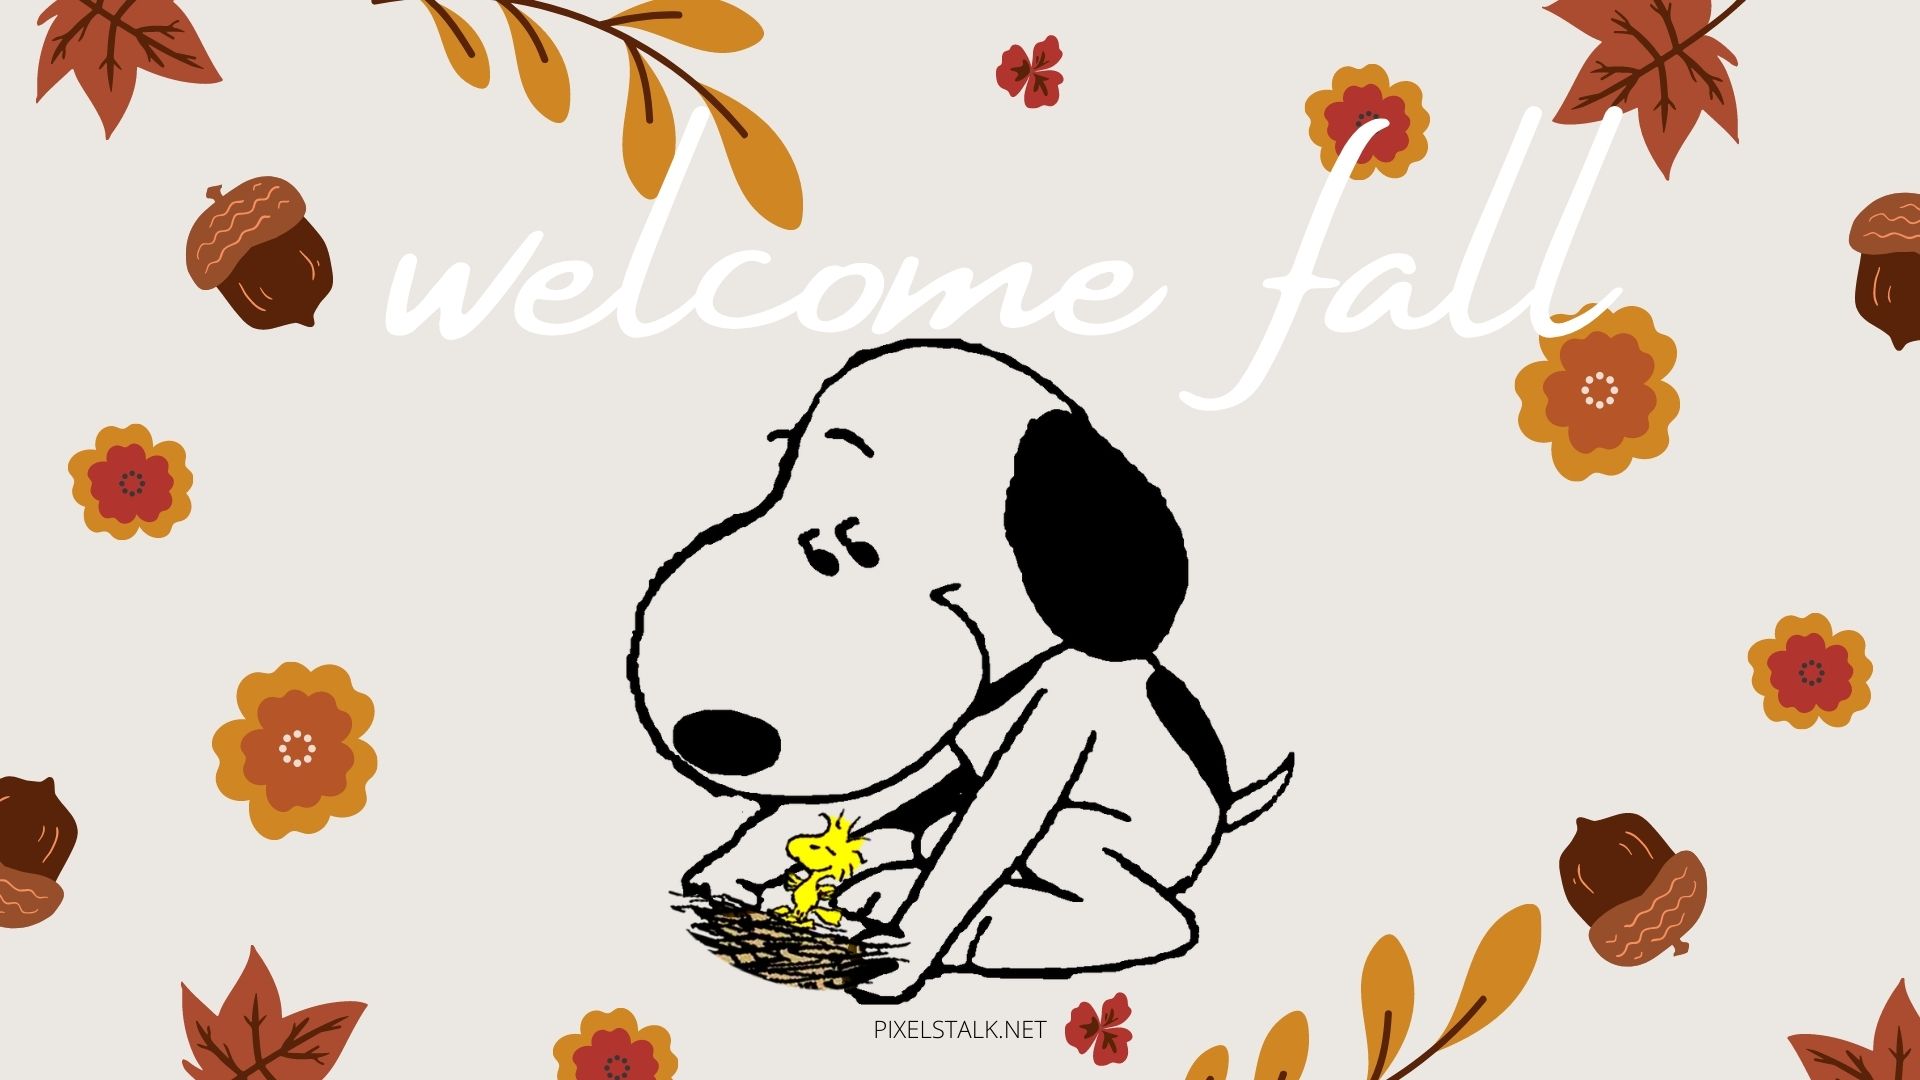 Snoopy Ipad Wallpapers